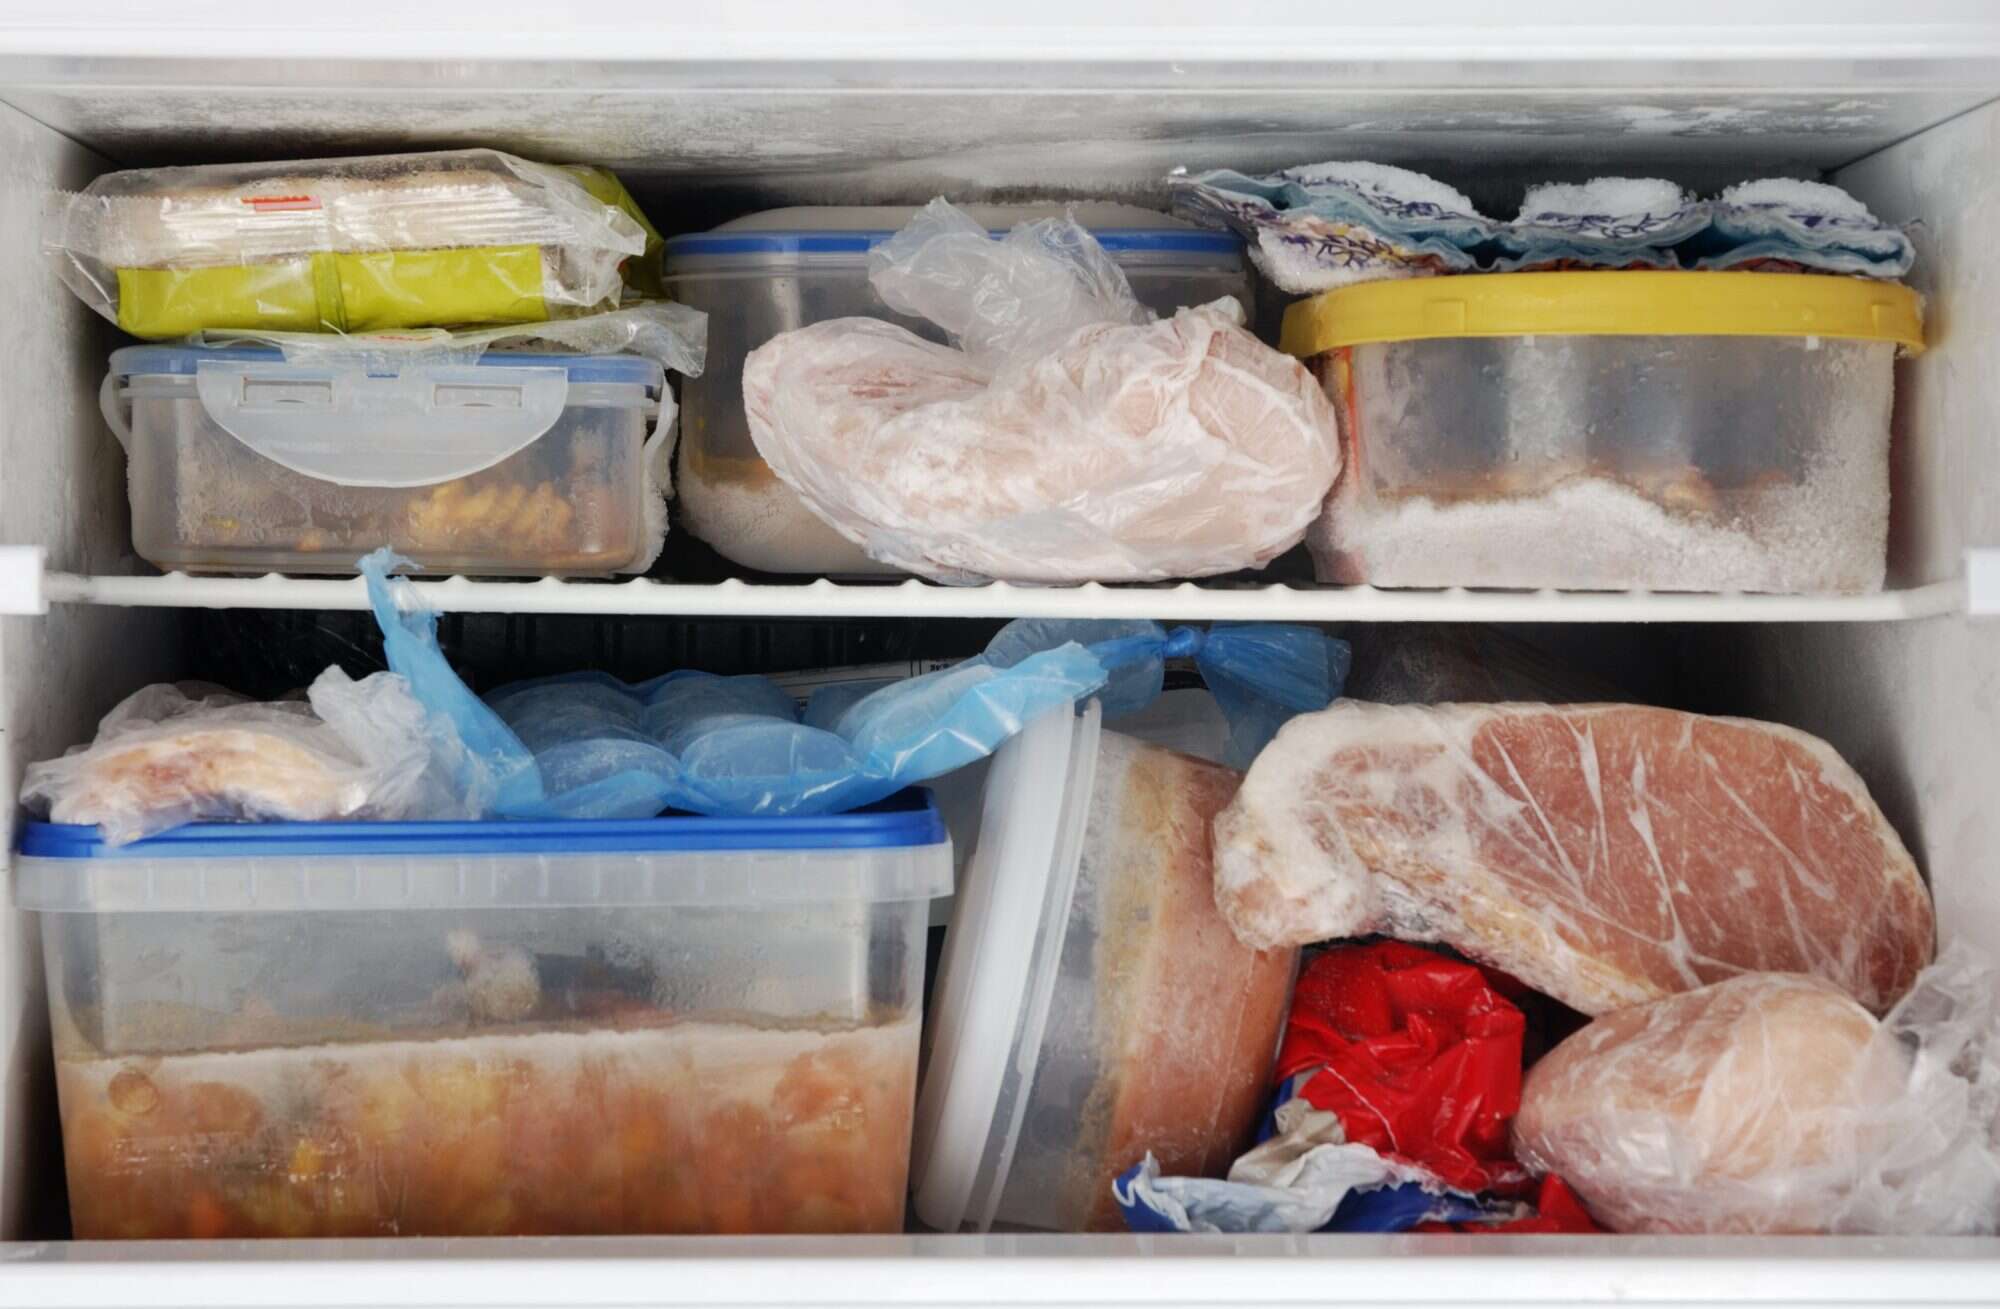 7 Freezer-Safe Containers You Can Put in the Oven